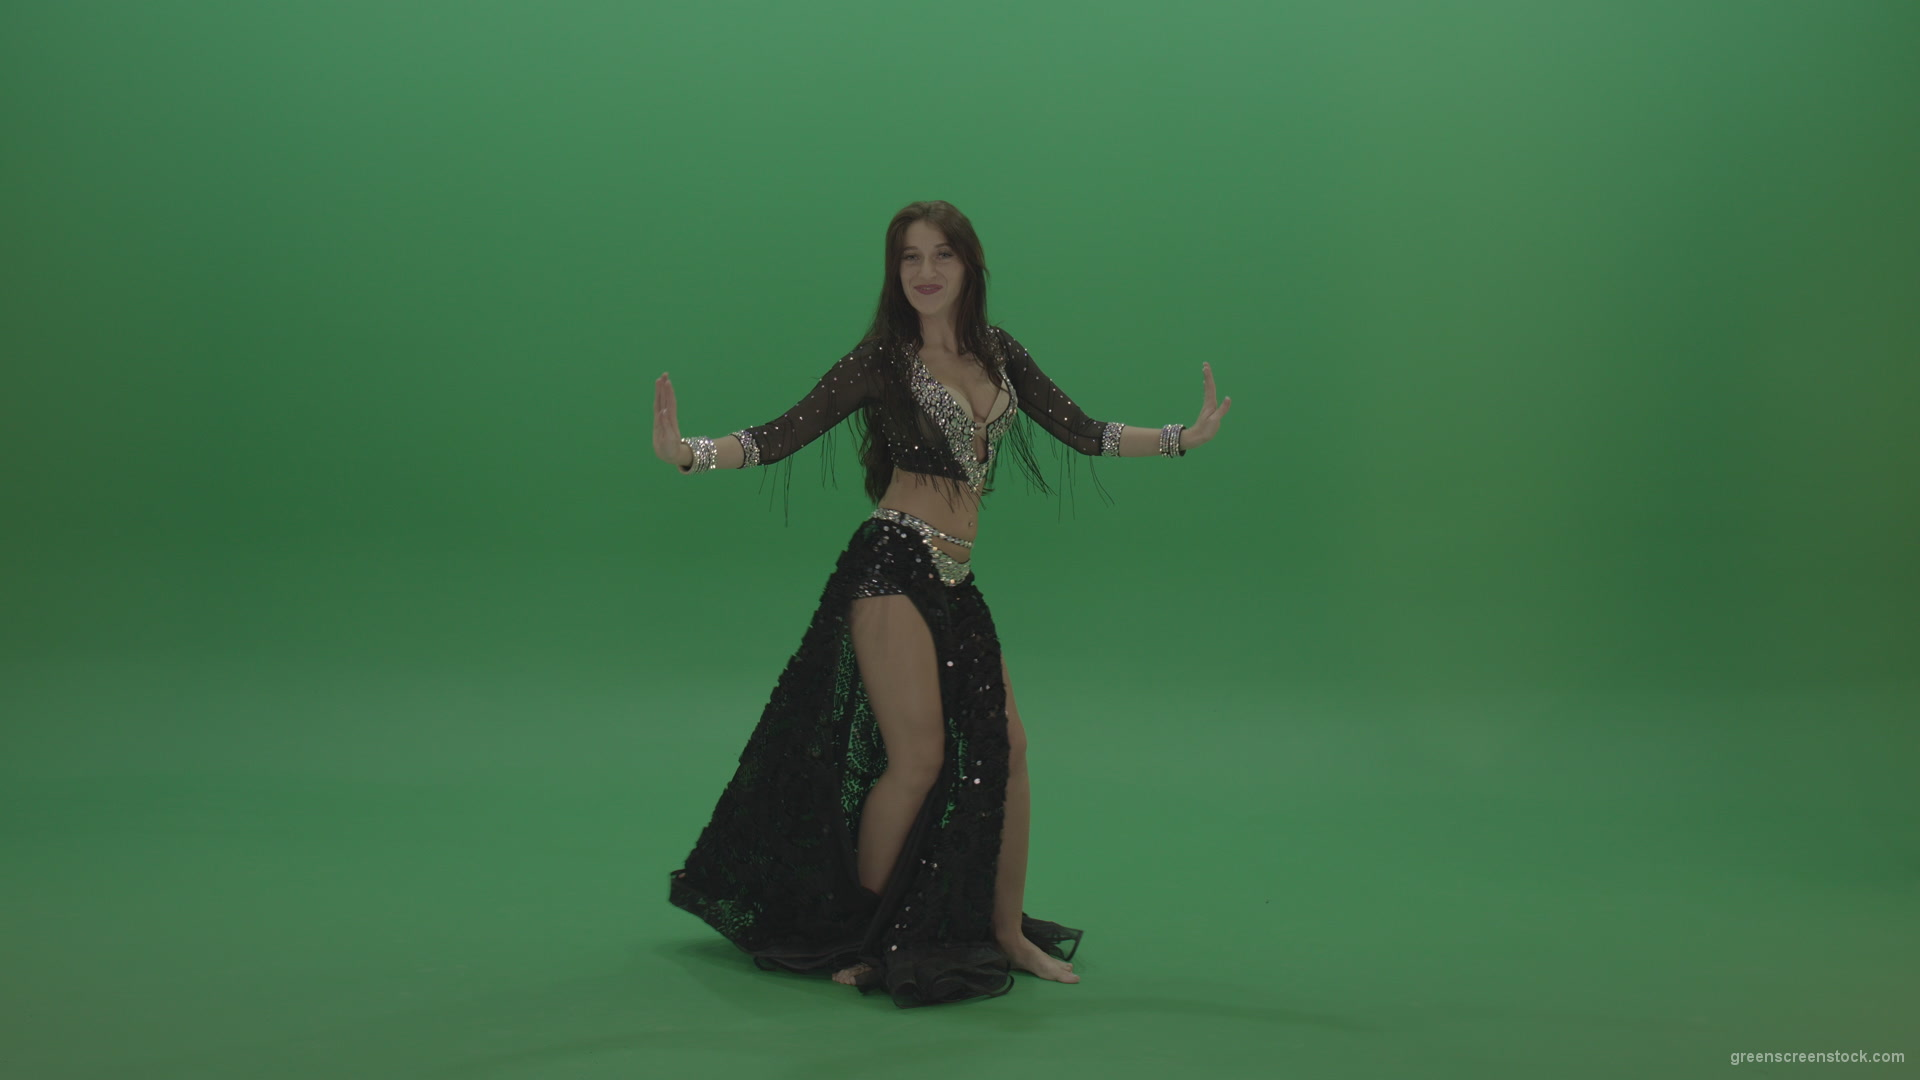 Adorable-belly-dancer-in-black-wear-display-amazing-dance-moves-over-chromakey-background_008 Green Screen Stock